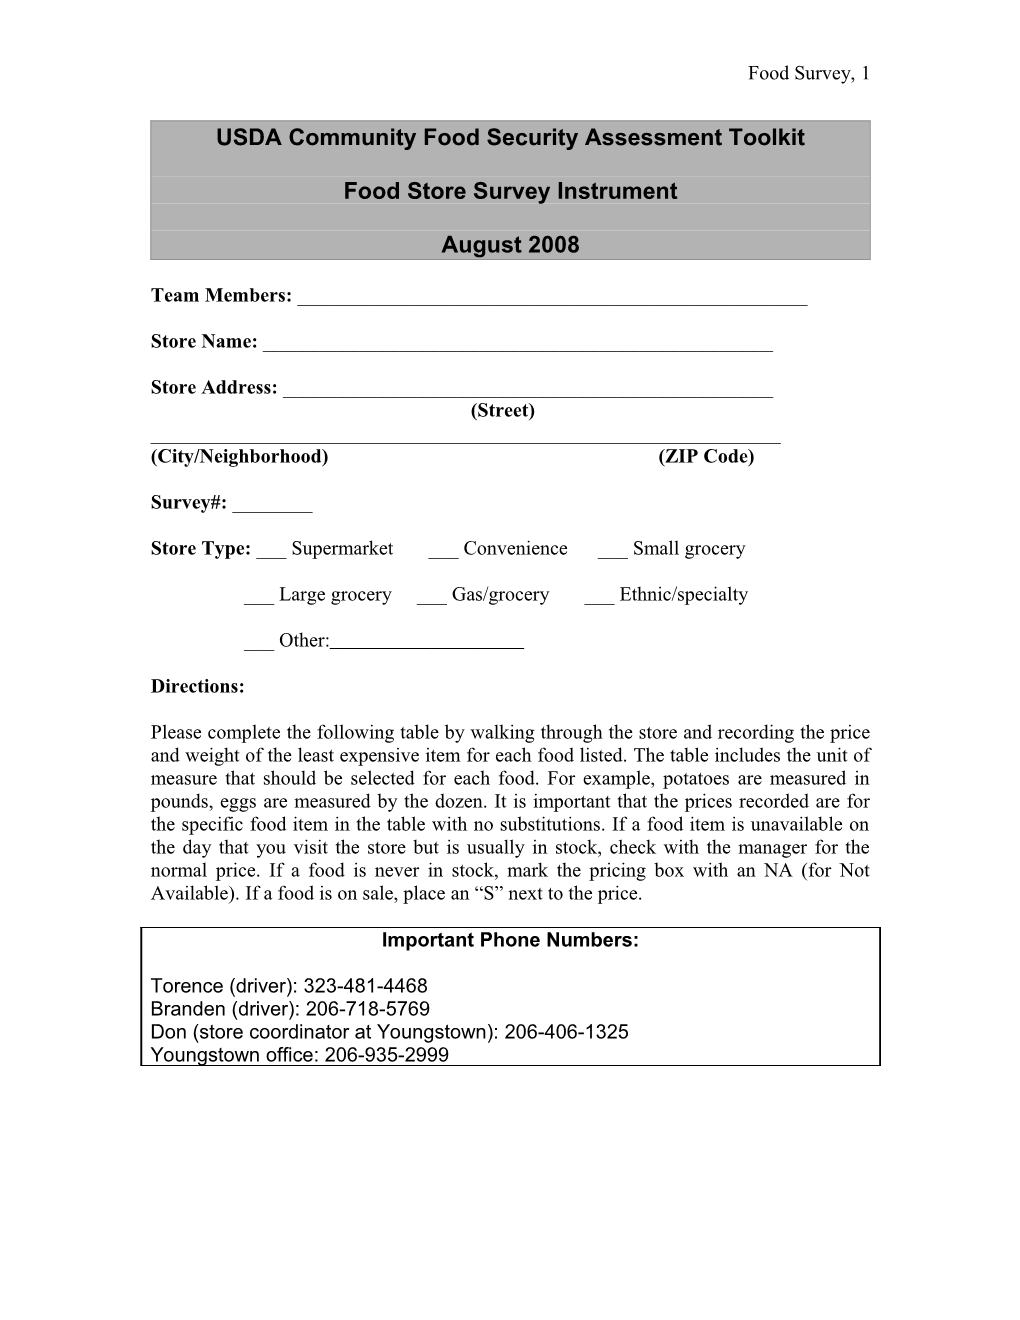 USDA Community Food Security Assessment Toolkit